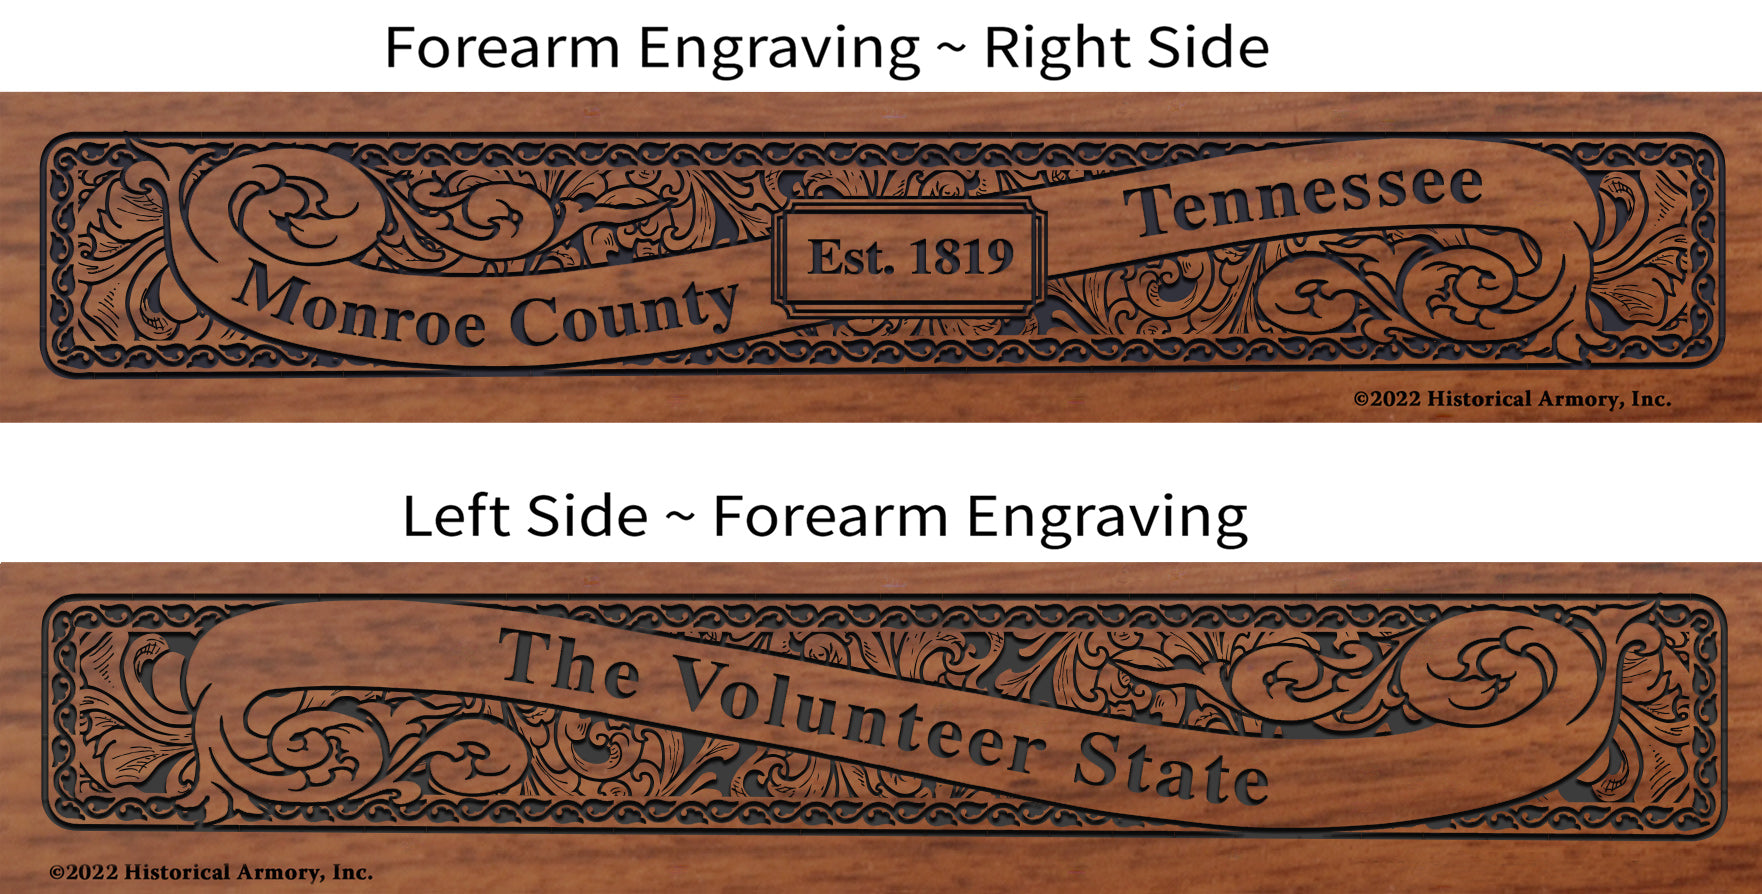 Monroe County Tennessee Engraved Rifle Forearm